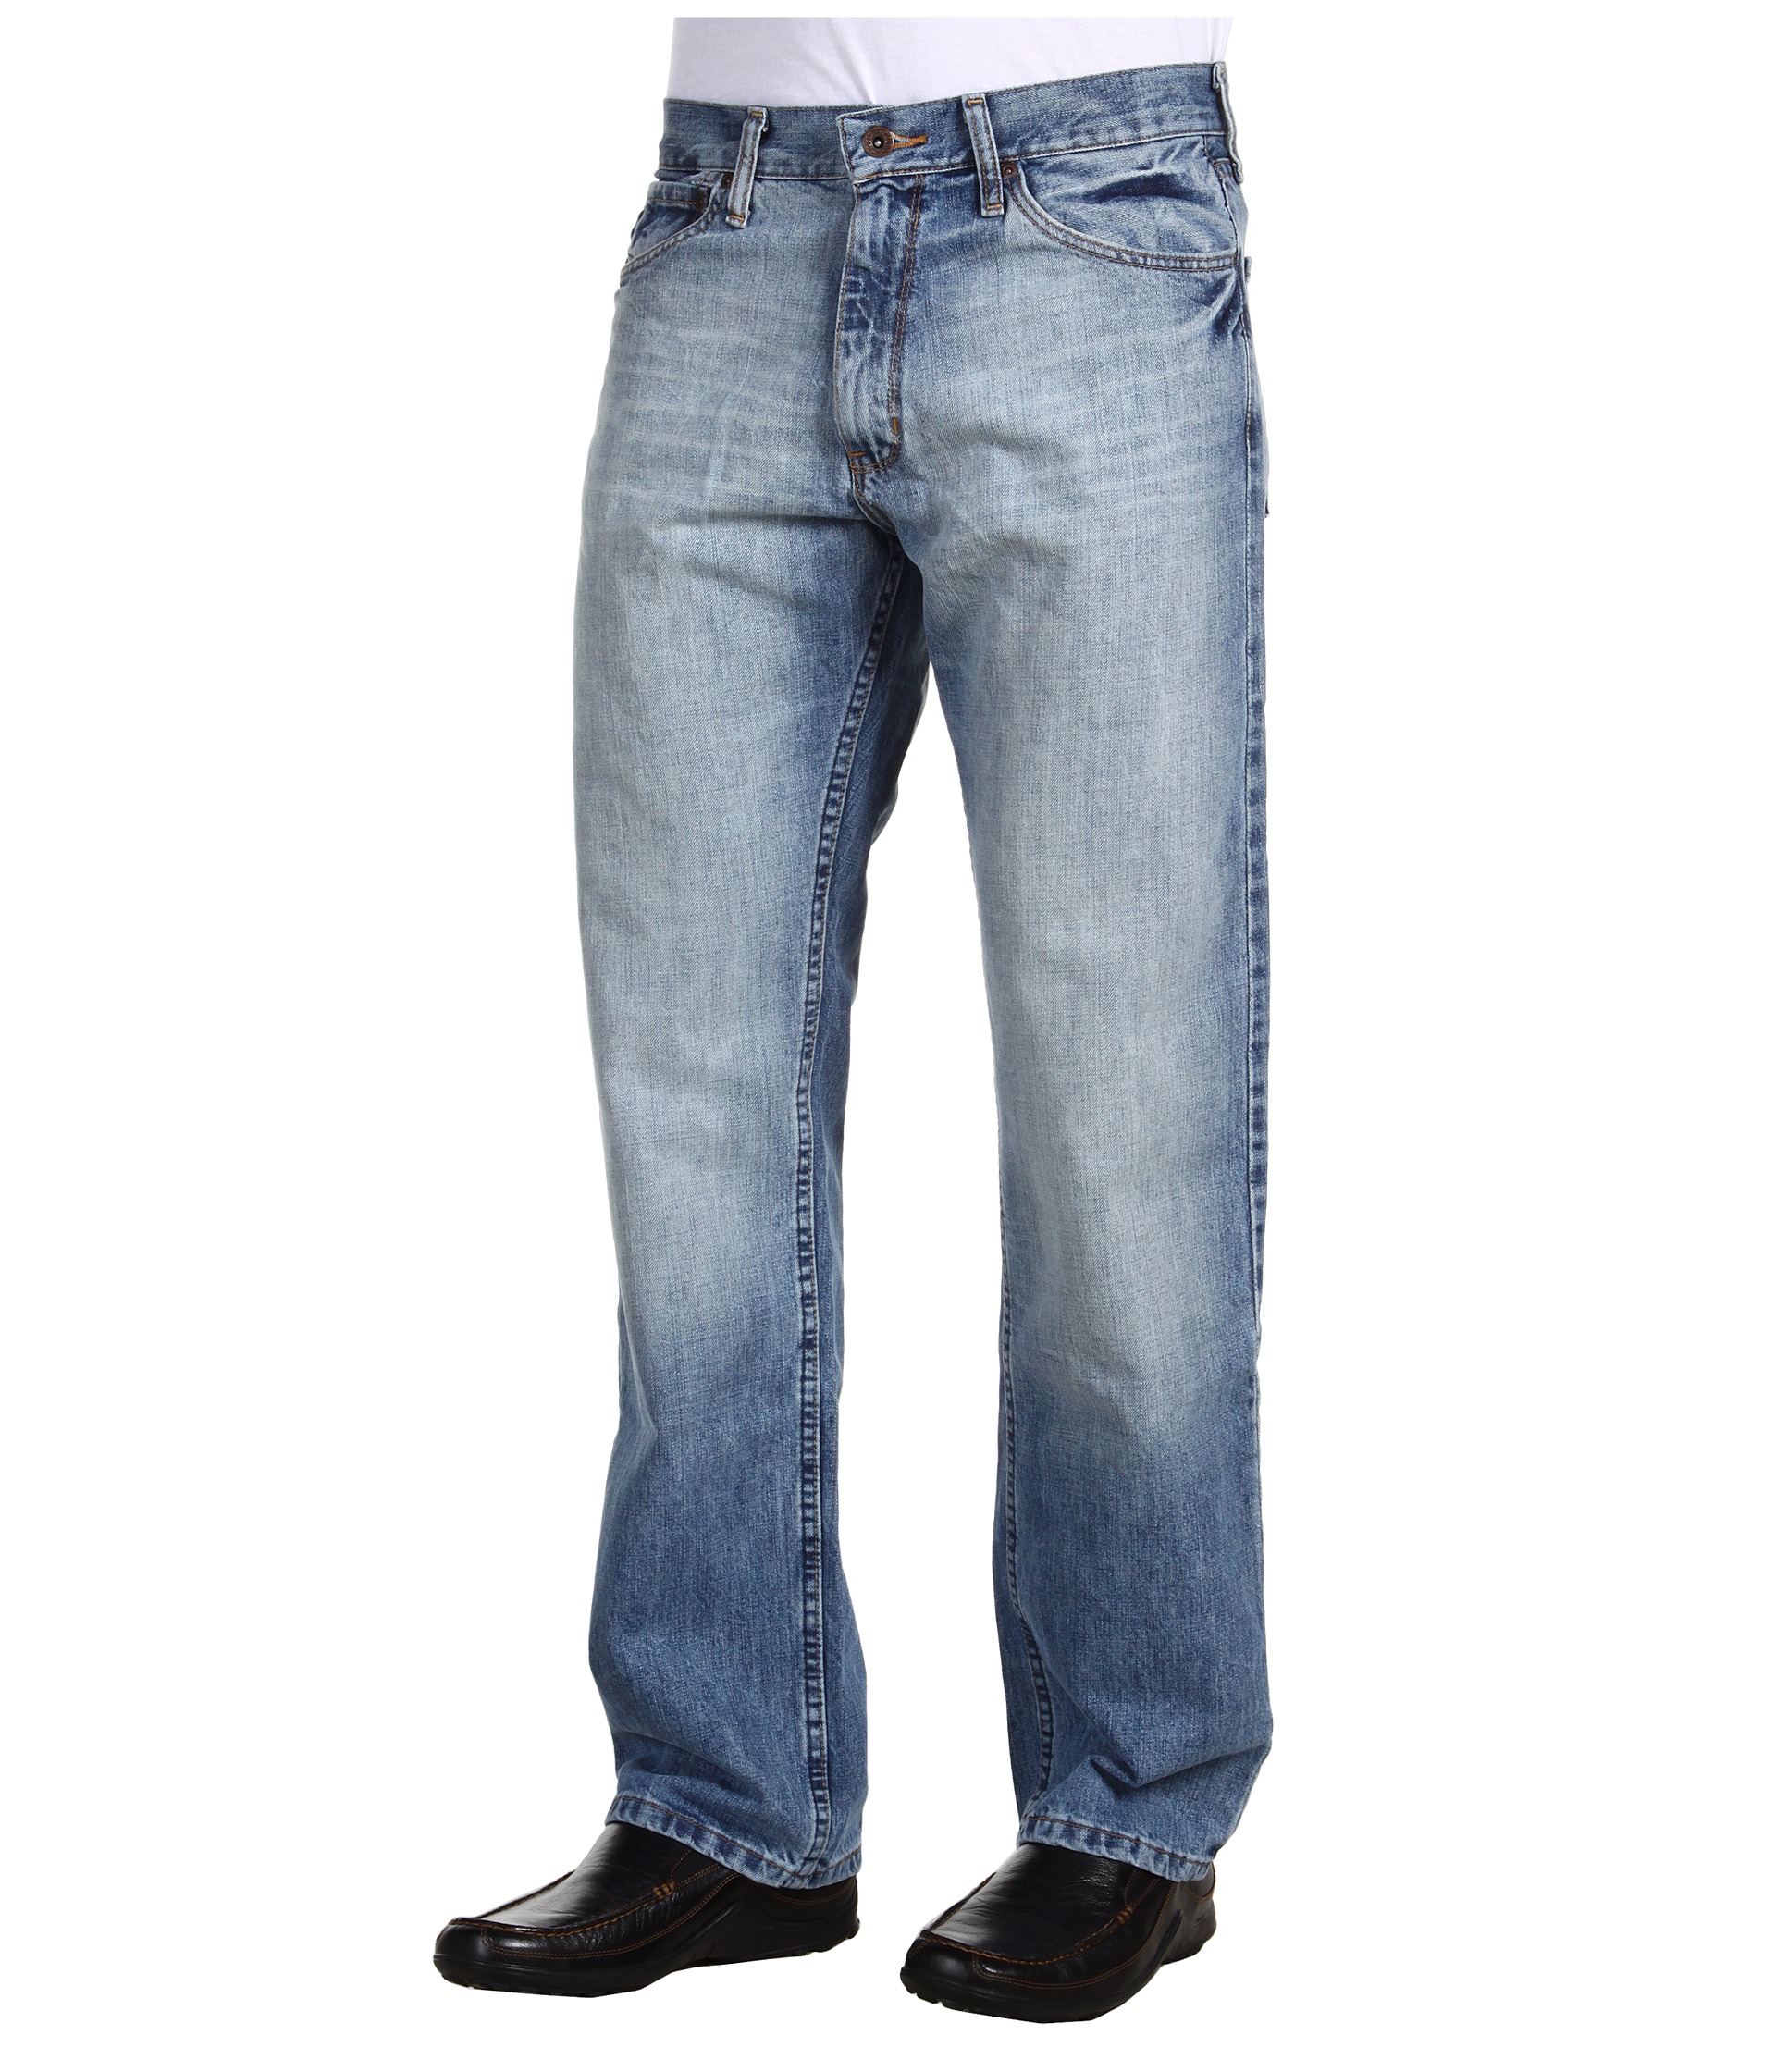 Nautica Relaxed Fit Light Wash Cross Hatch Jean at Zappos.com